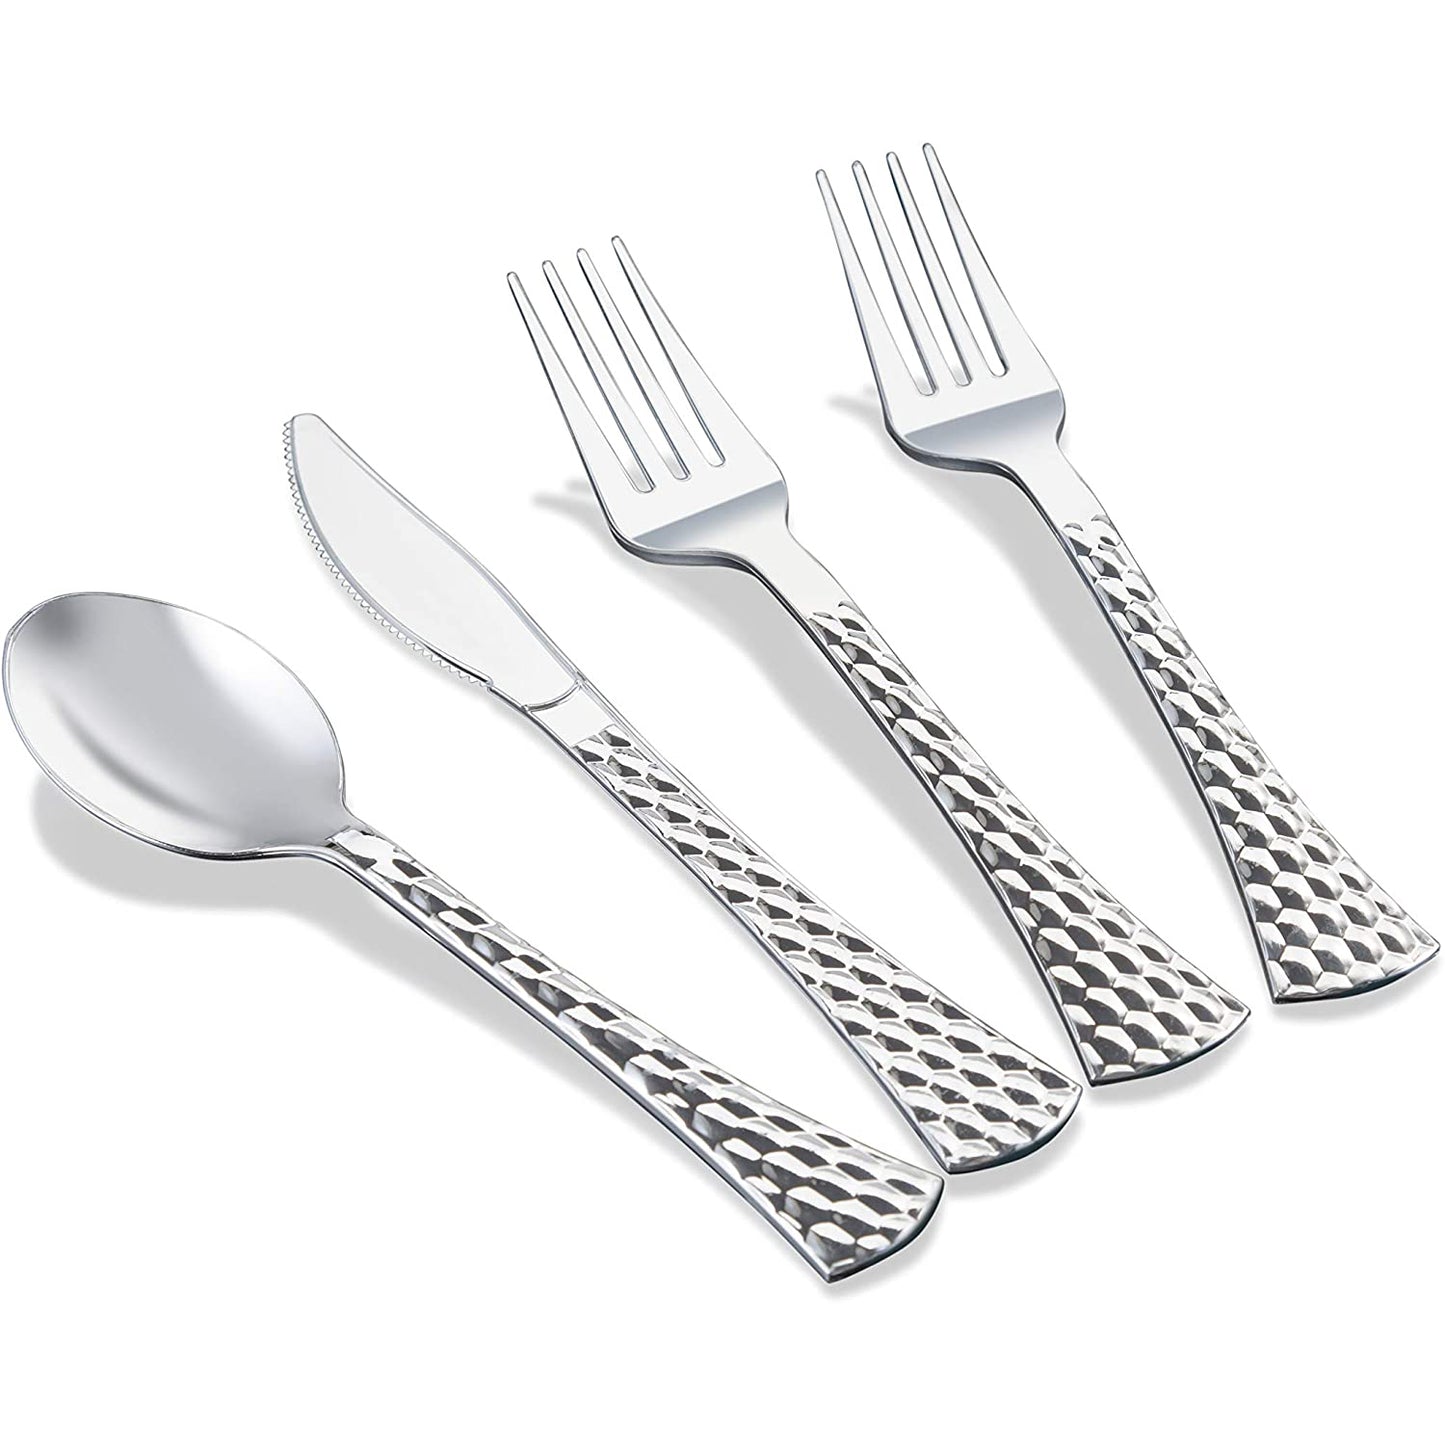 Glamour Collection Extra Heavyweight Disposable Knives Silver Tablesettings Decorline   